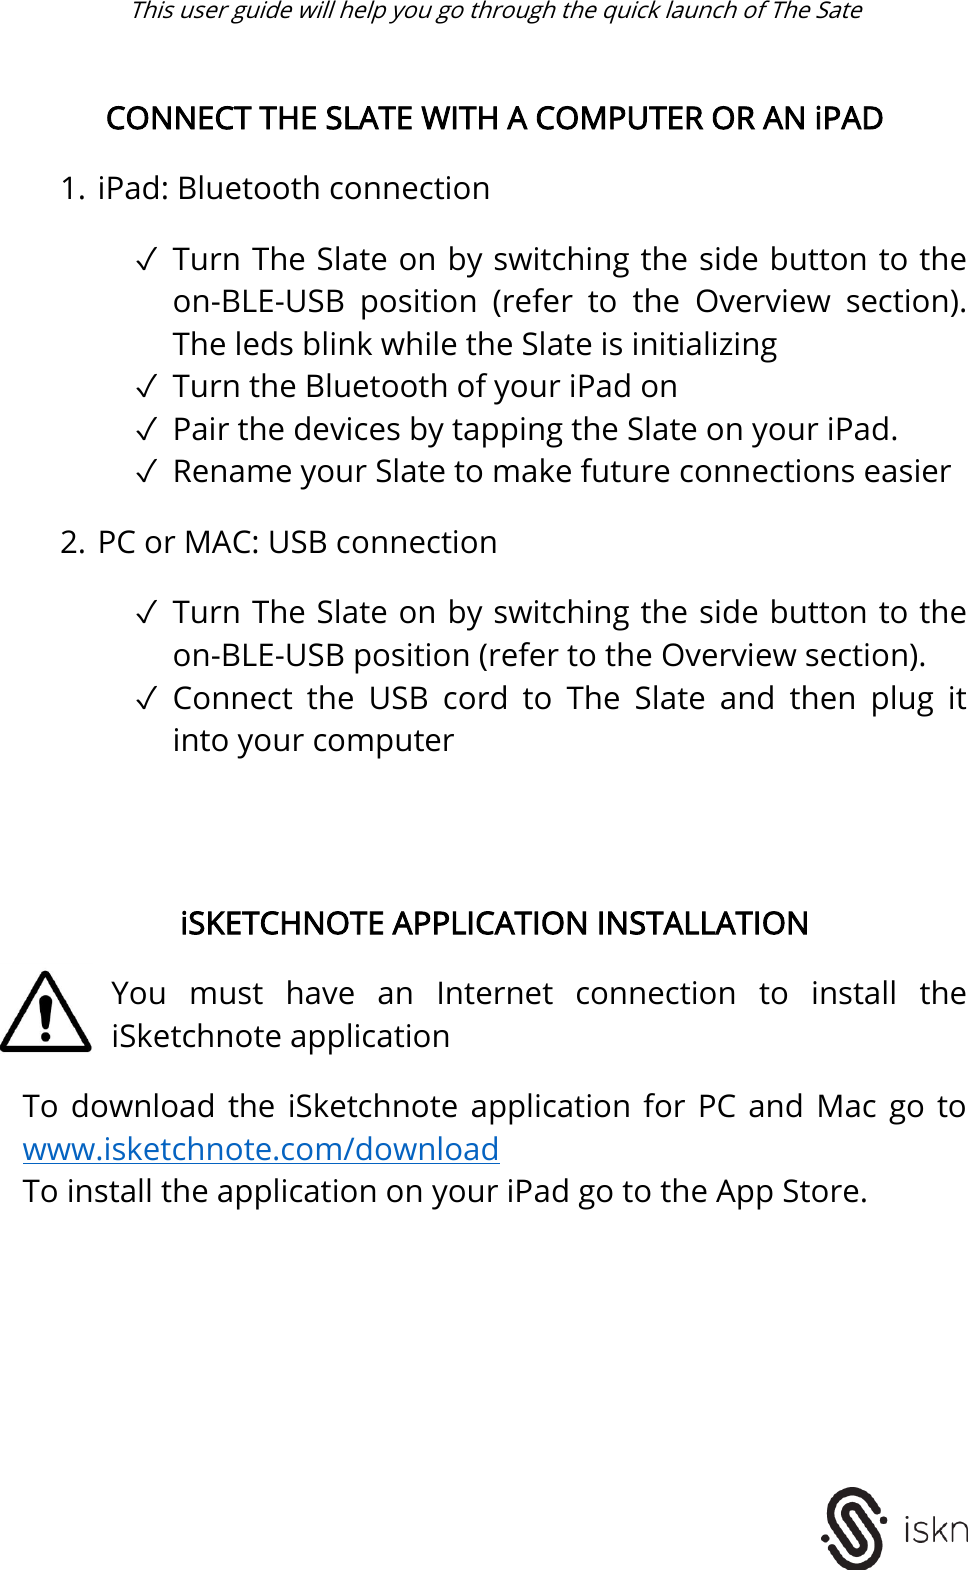  This user guide will help you go through the quick launch of The Sate    CONNECT THE SLATE WITH A COMPUTER OR AN iPAD  1. iPad: Bluetooth connection  ✓ Turn The Slate on by switching the side button to the on-BLE-USB  position  (refer  to  the  Overview  section). The leds blink while the Slate is initializing ✓ Turn the Bluetooth of your iPad on ✓ Pair the devices by tapping the Slate on your iPad. ✓ Rename your Slate to make future connections easier   2. PC or MAC: USB connection  ✓ Turn The Slate on by switching the side button to the on-BLE-USB position (refer to the Overview section).  ✓ Connect  the  USB  cord  to  The  Slate  and  then  plug  it into your computer      iSKETCHNOTE APPLICATION INSTALLATION  You  must  have  an  Internet  connection  to  install  the iSketchnote application  To  download  the iSketchnote application  for  PC  and  Mac  go  to www.isketchnote.com/download To install the application on your iPad go to the App Store.           